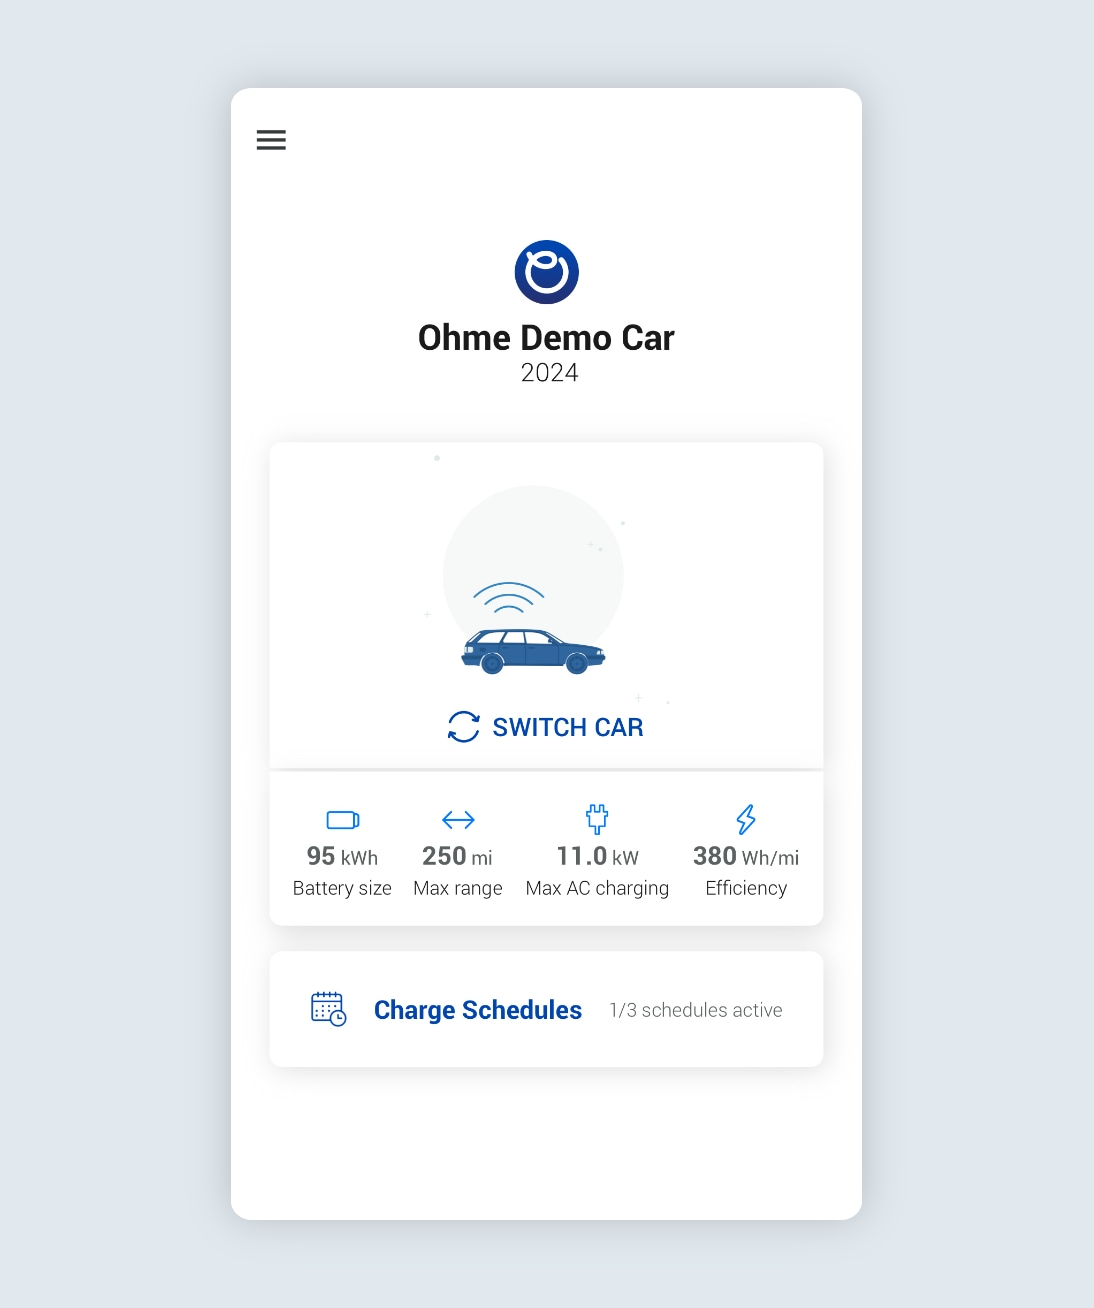 Manage my EV car without the car app account logged in